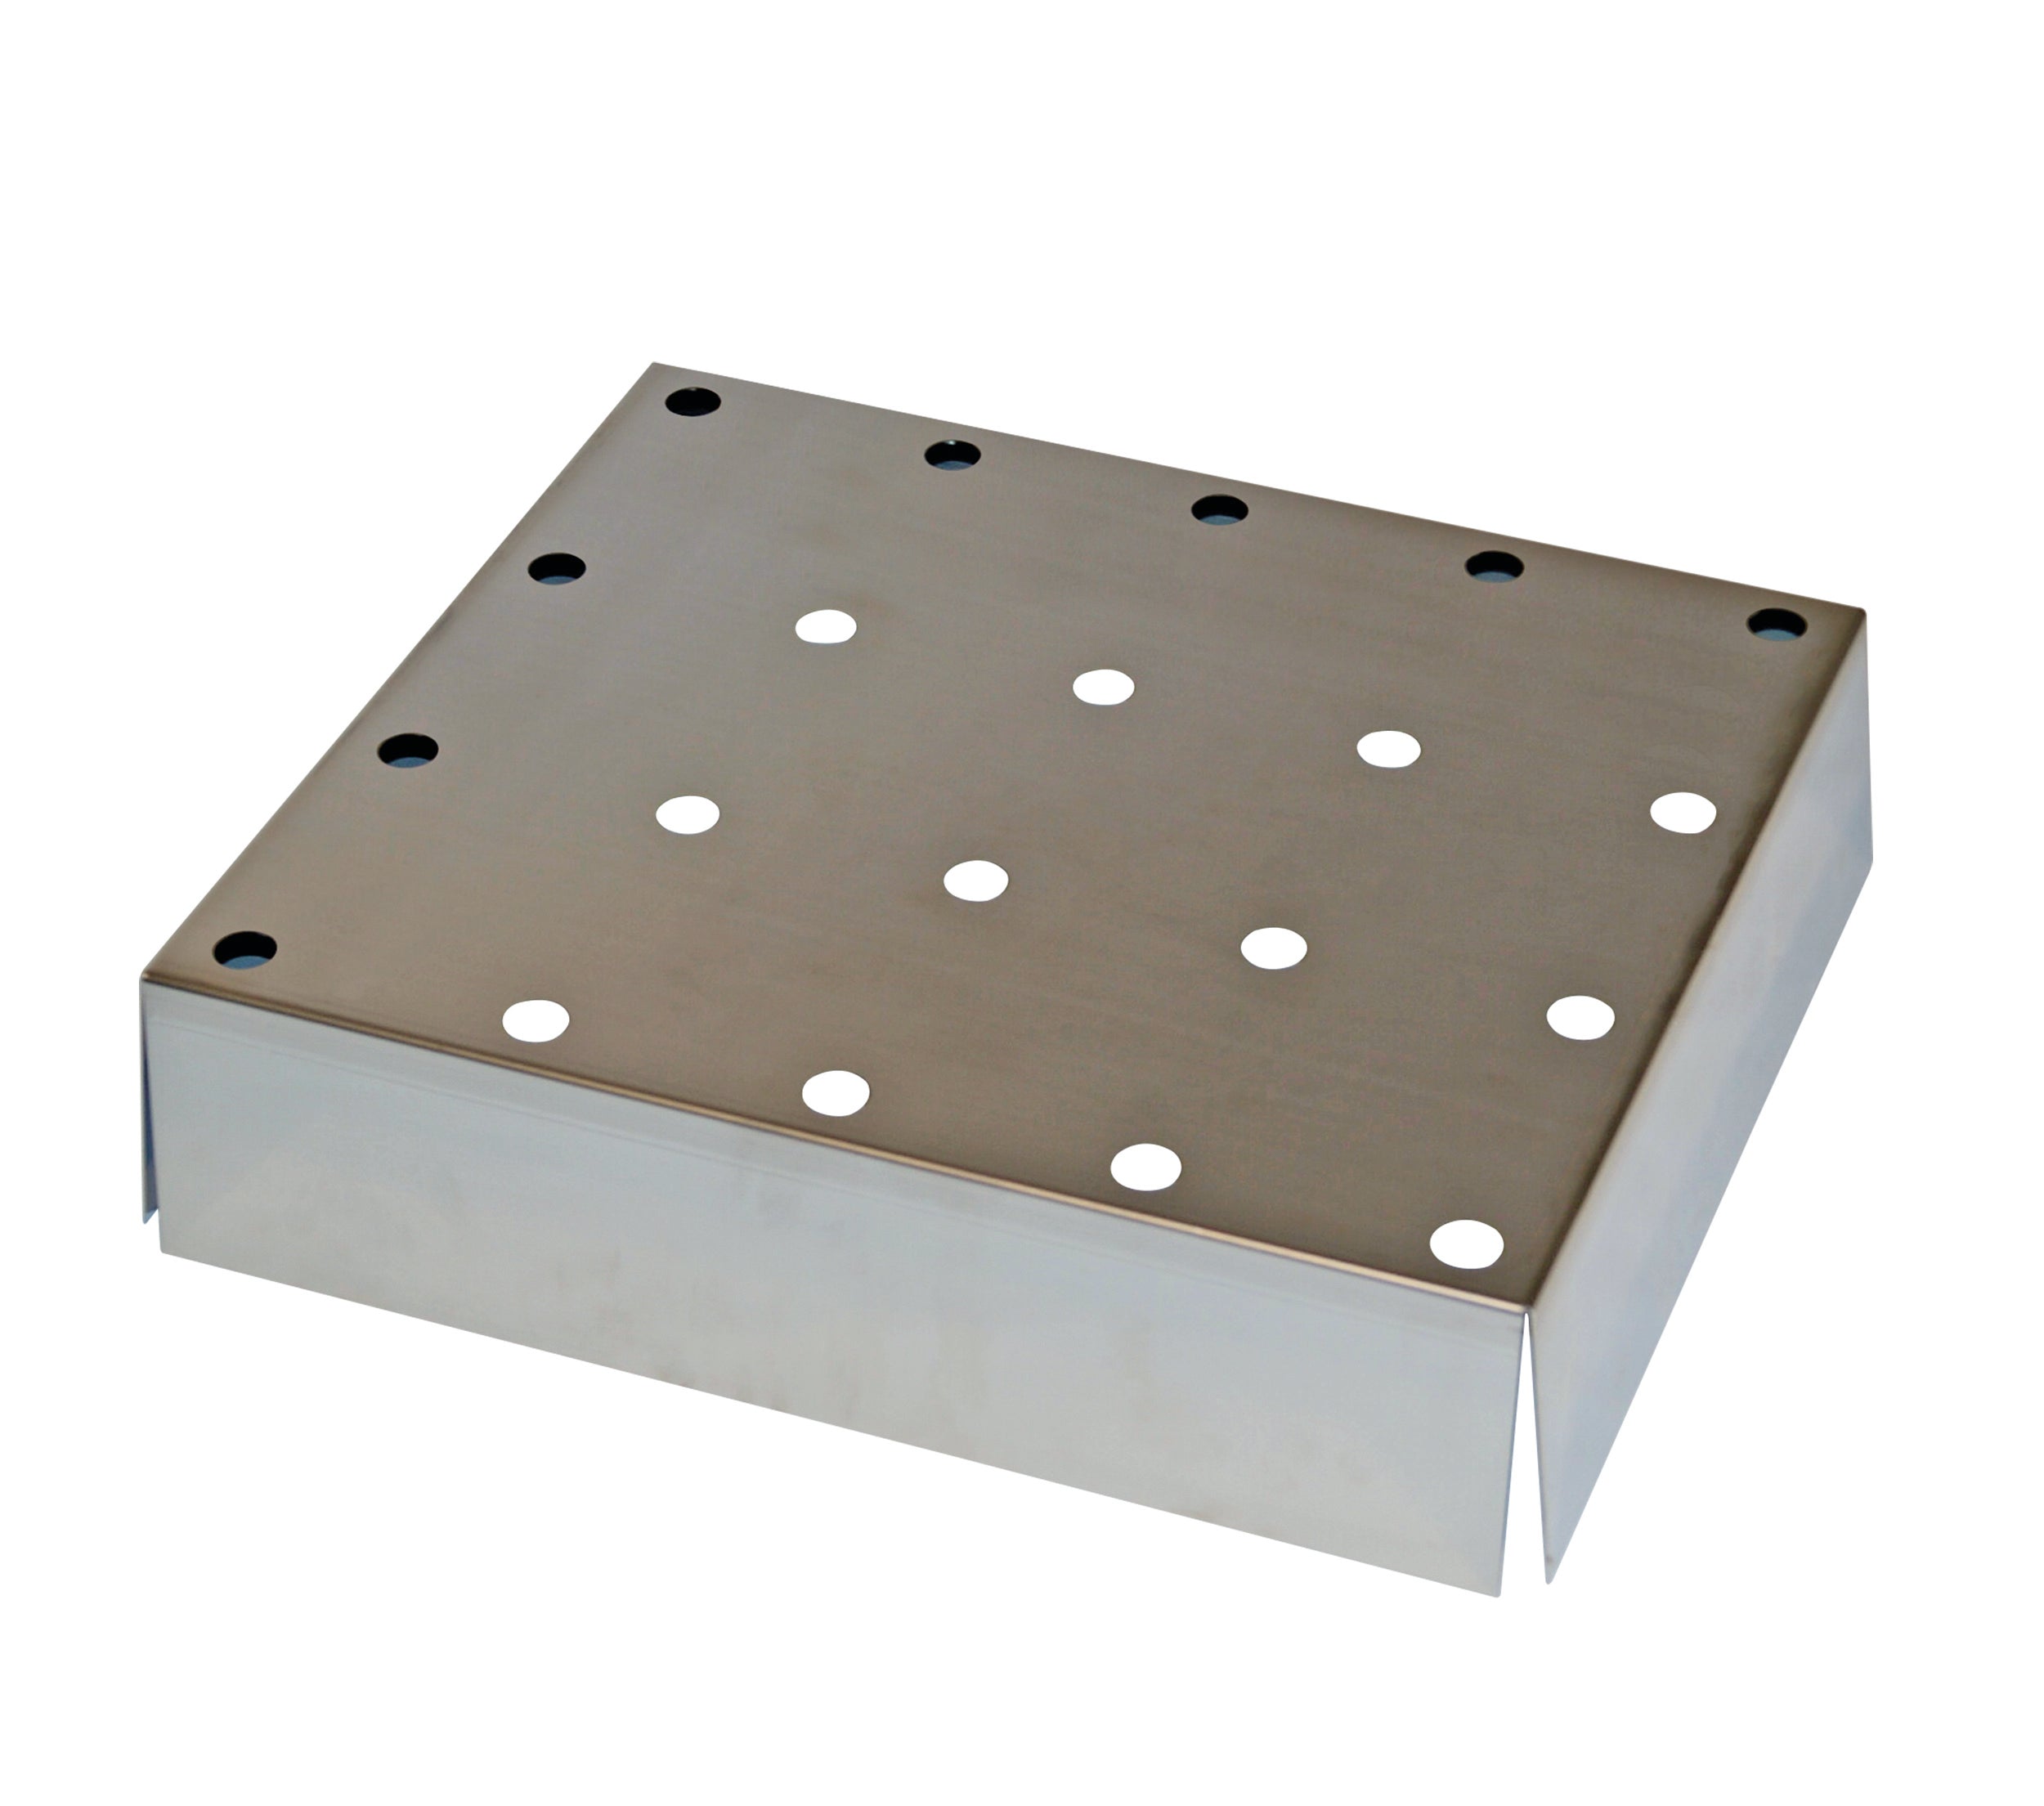 Perforated insert standard for STAWA-R approved for model(s): Q90, Q30, S90 with width 600 mm, stainless steel 1.416 raw